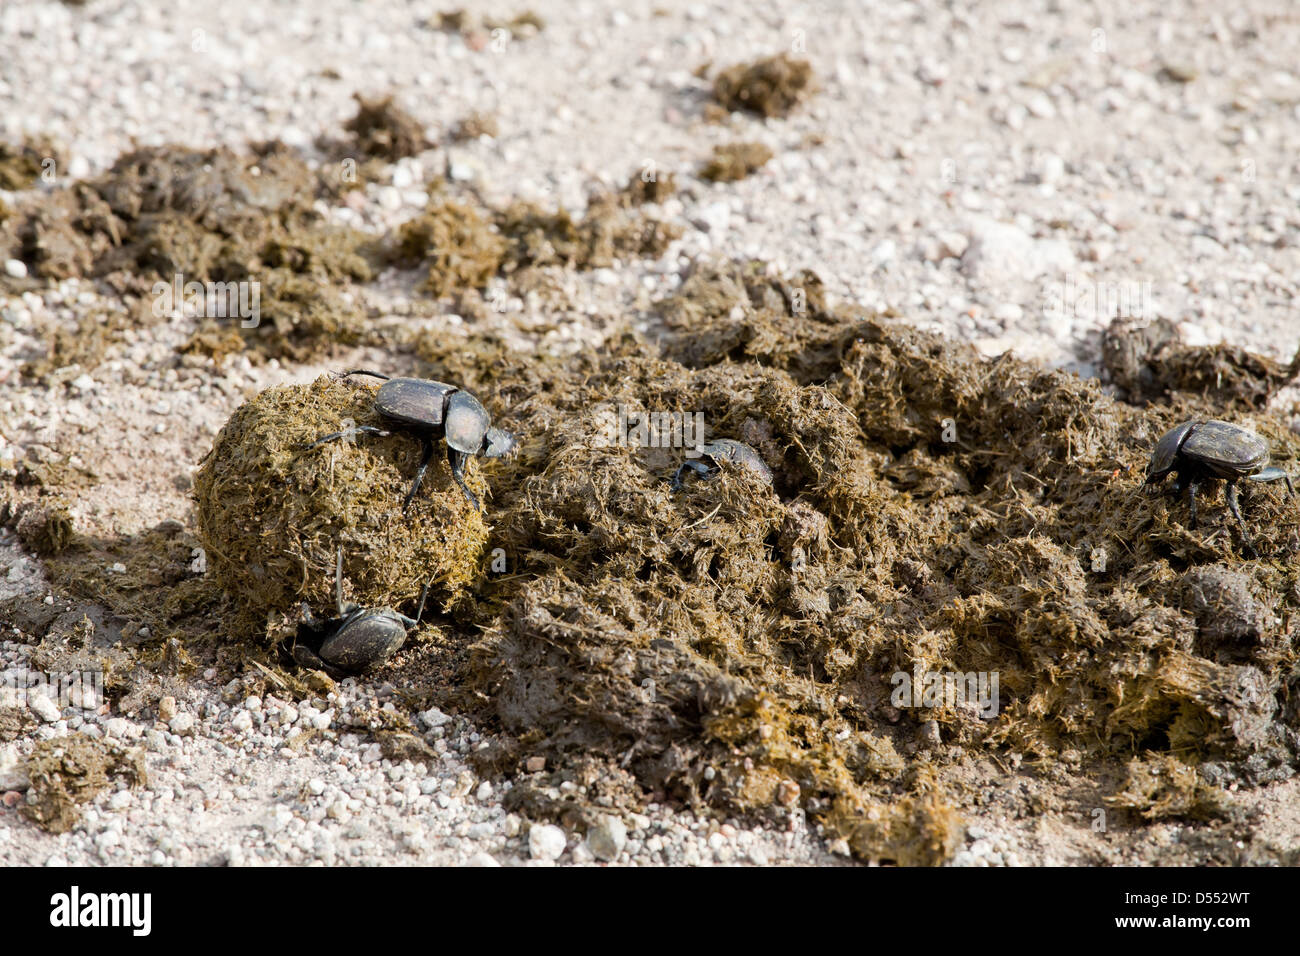 Scarabaeus Beetles are collecting dung ball. South Africa, Kruger's National Park. Stock Photo